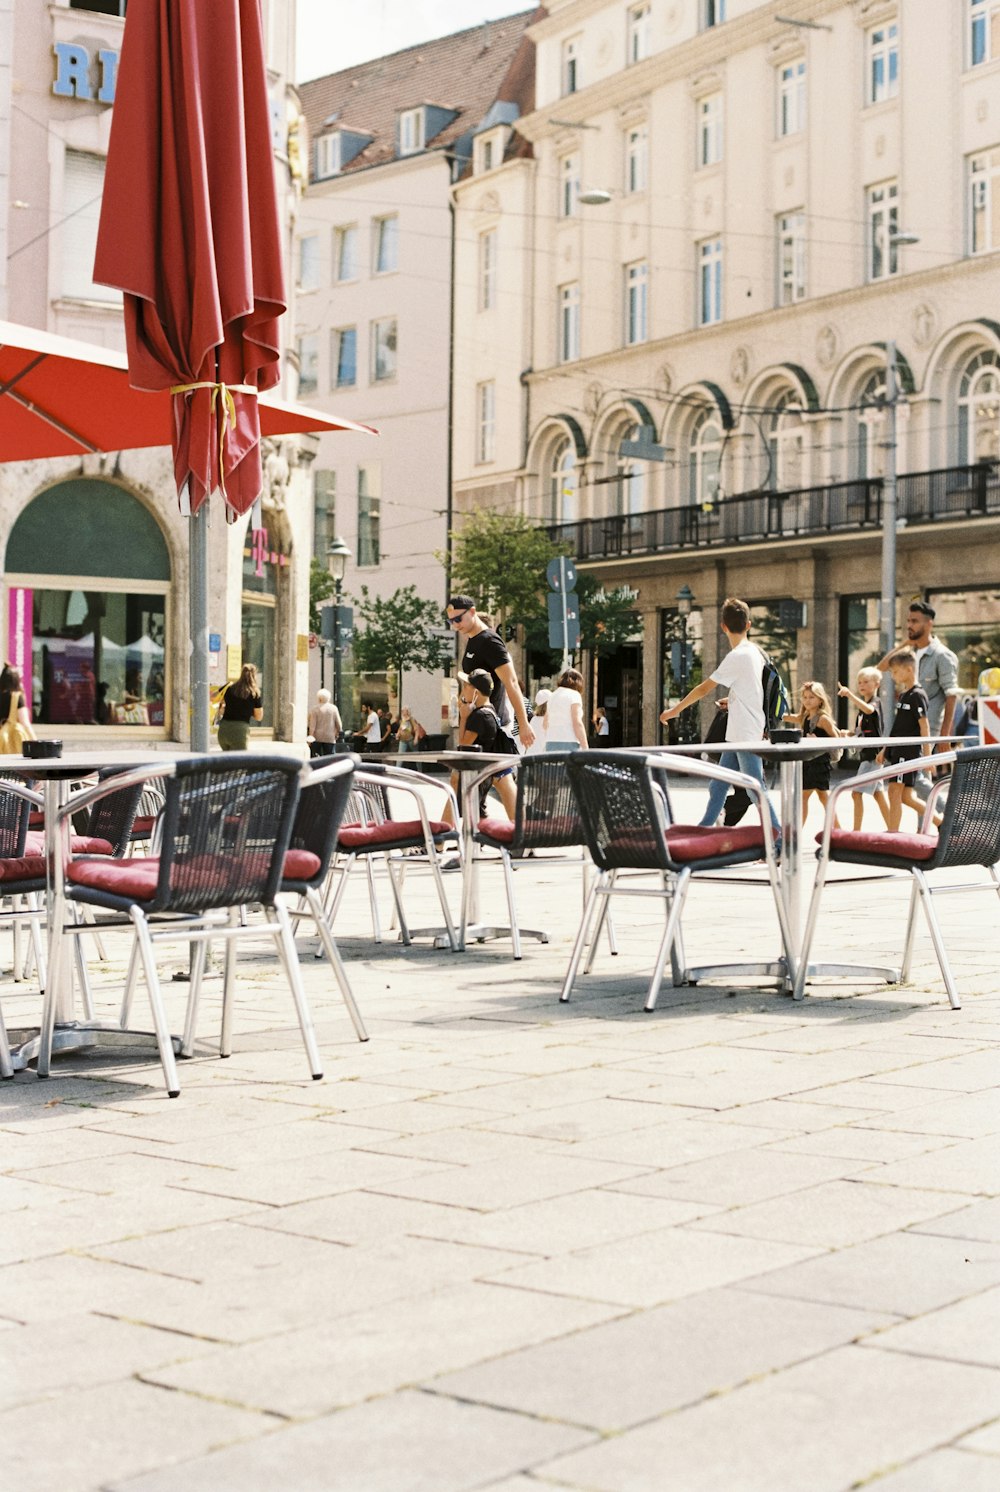 a group of chairs and umbrellas sitting on a sidewalk